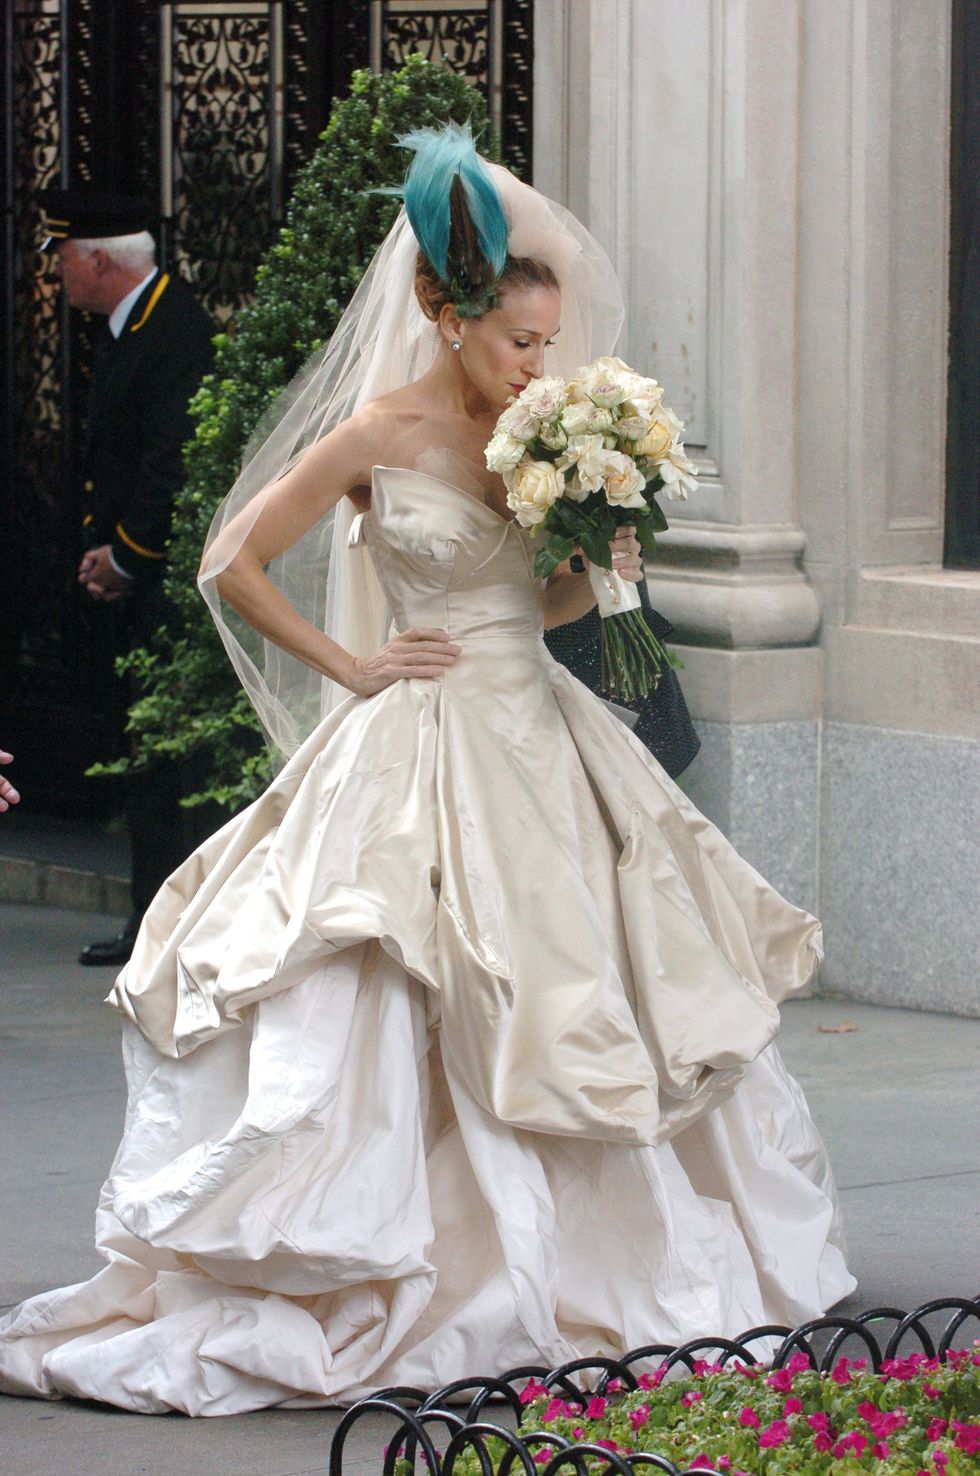 sarah jessica parker in wedding dress at filming of sex and